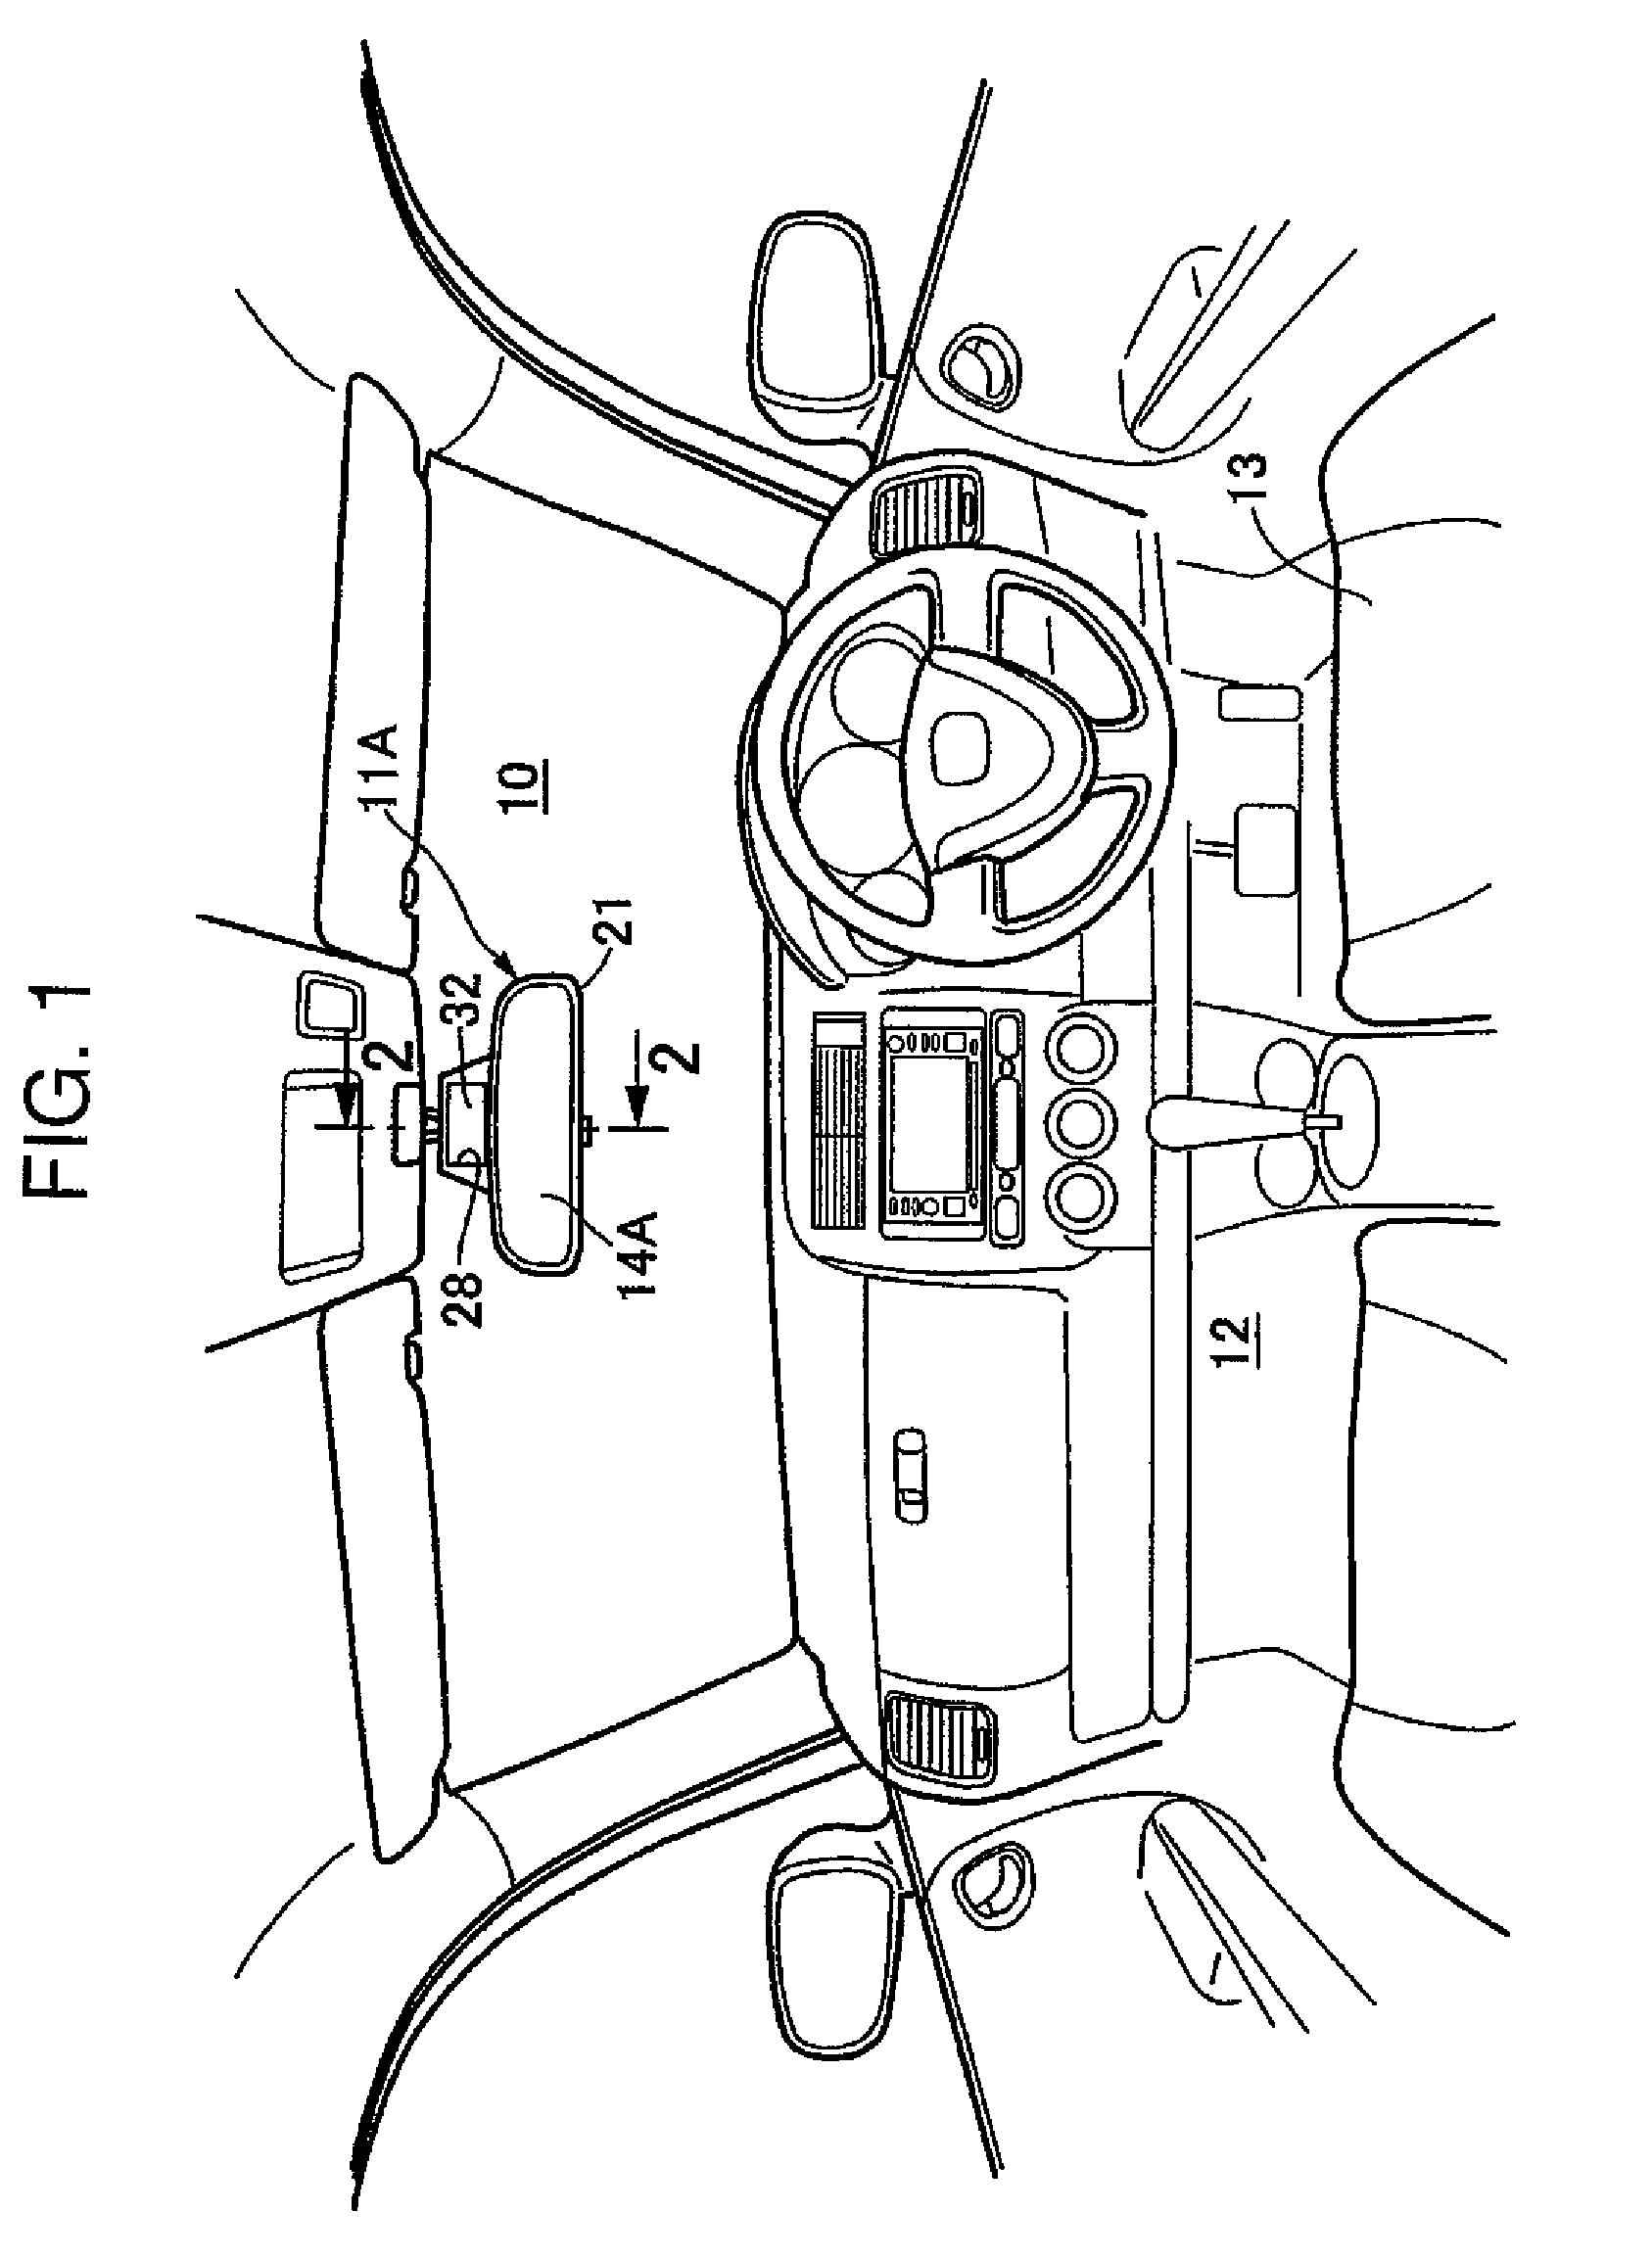 Rear-view mirror system with display device